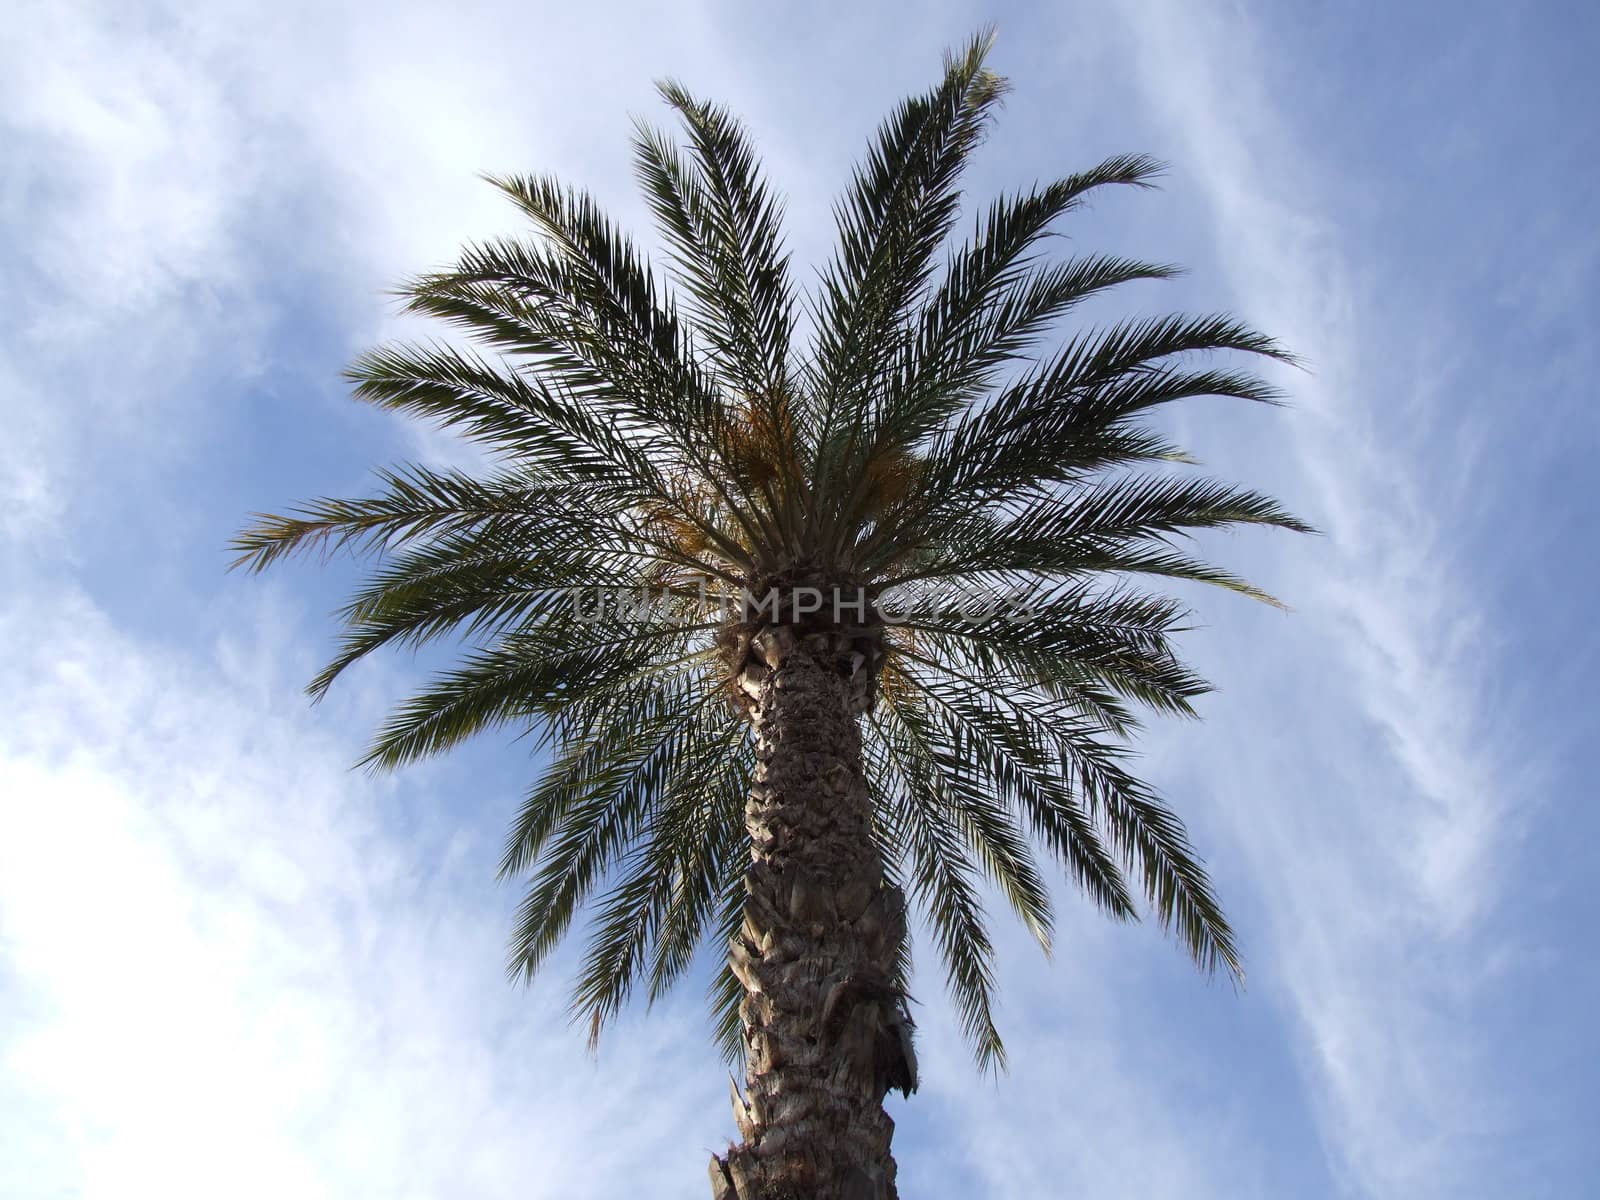 Palm Trees with Cloud Background by steveabcuk